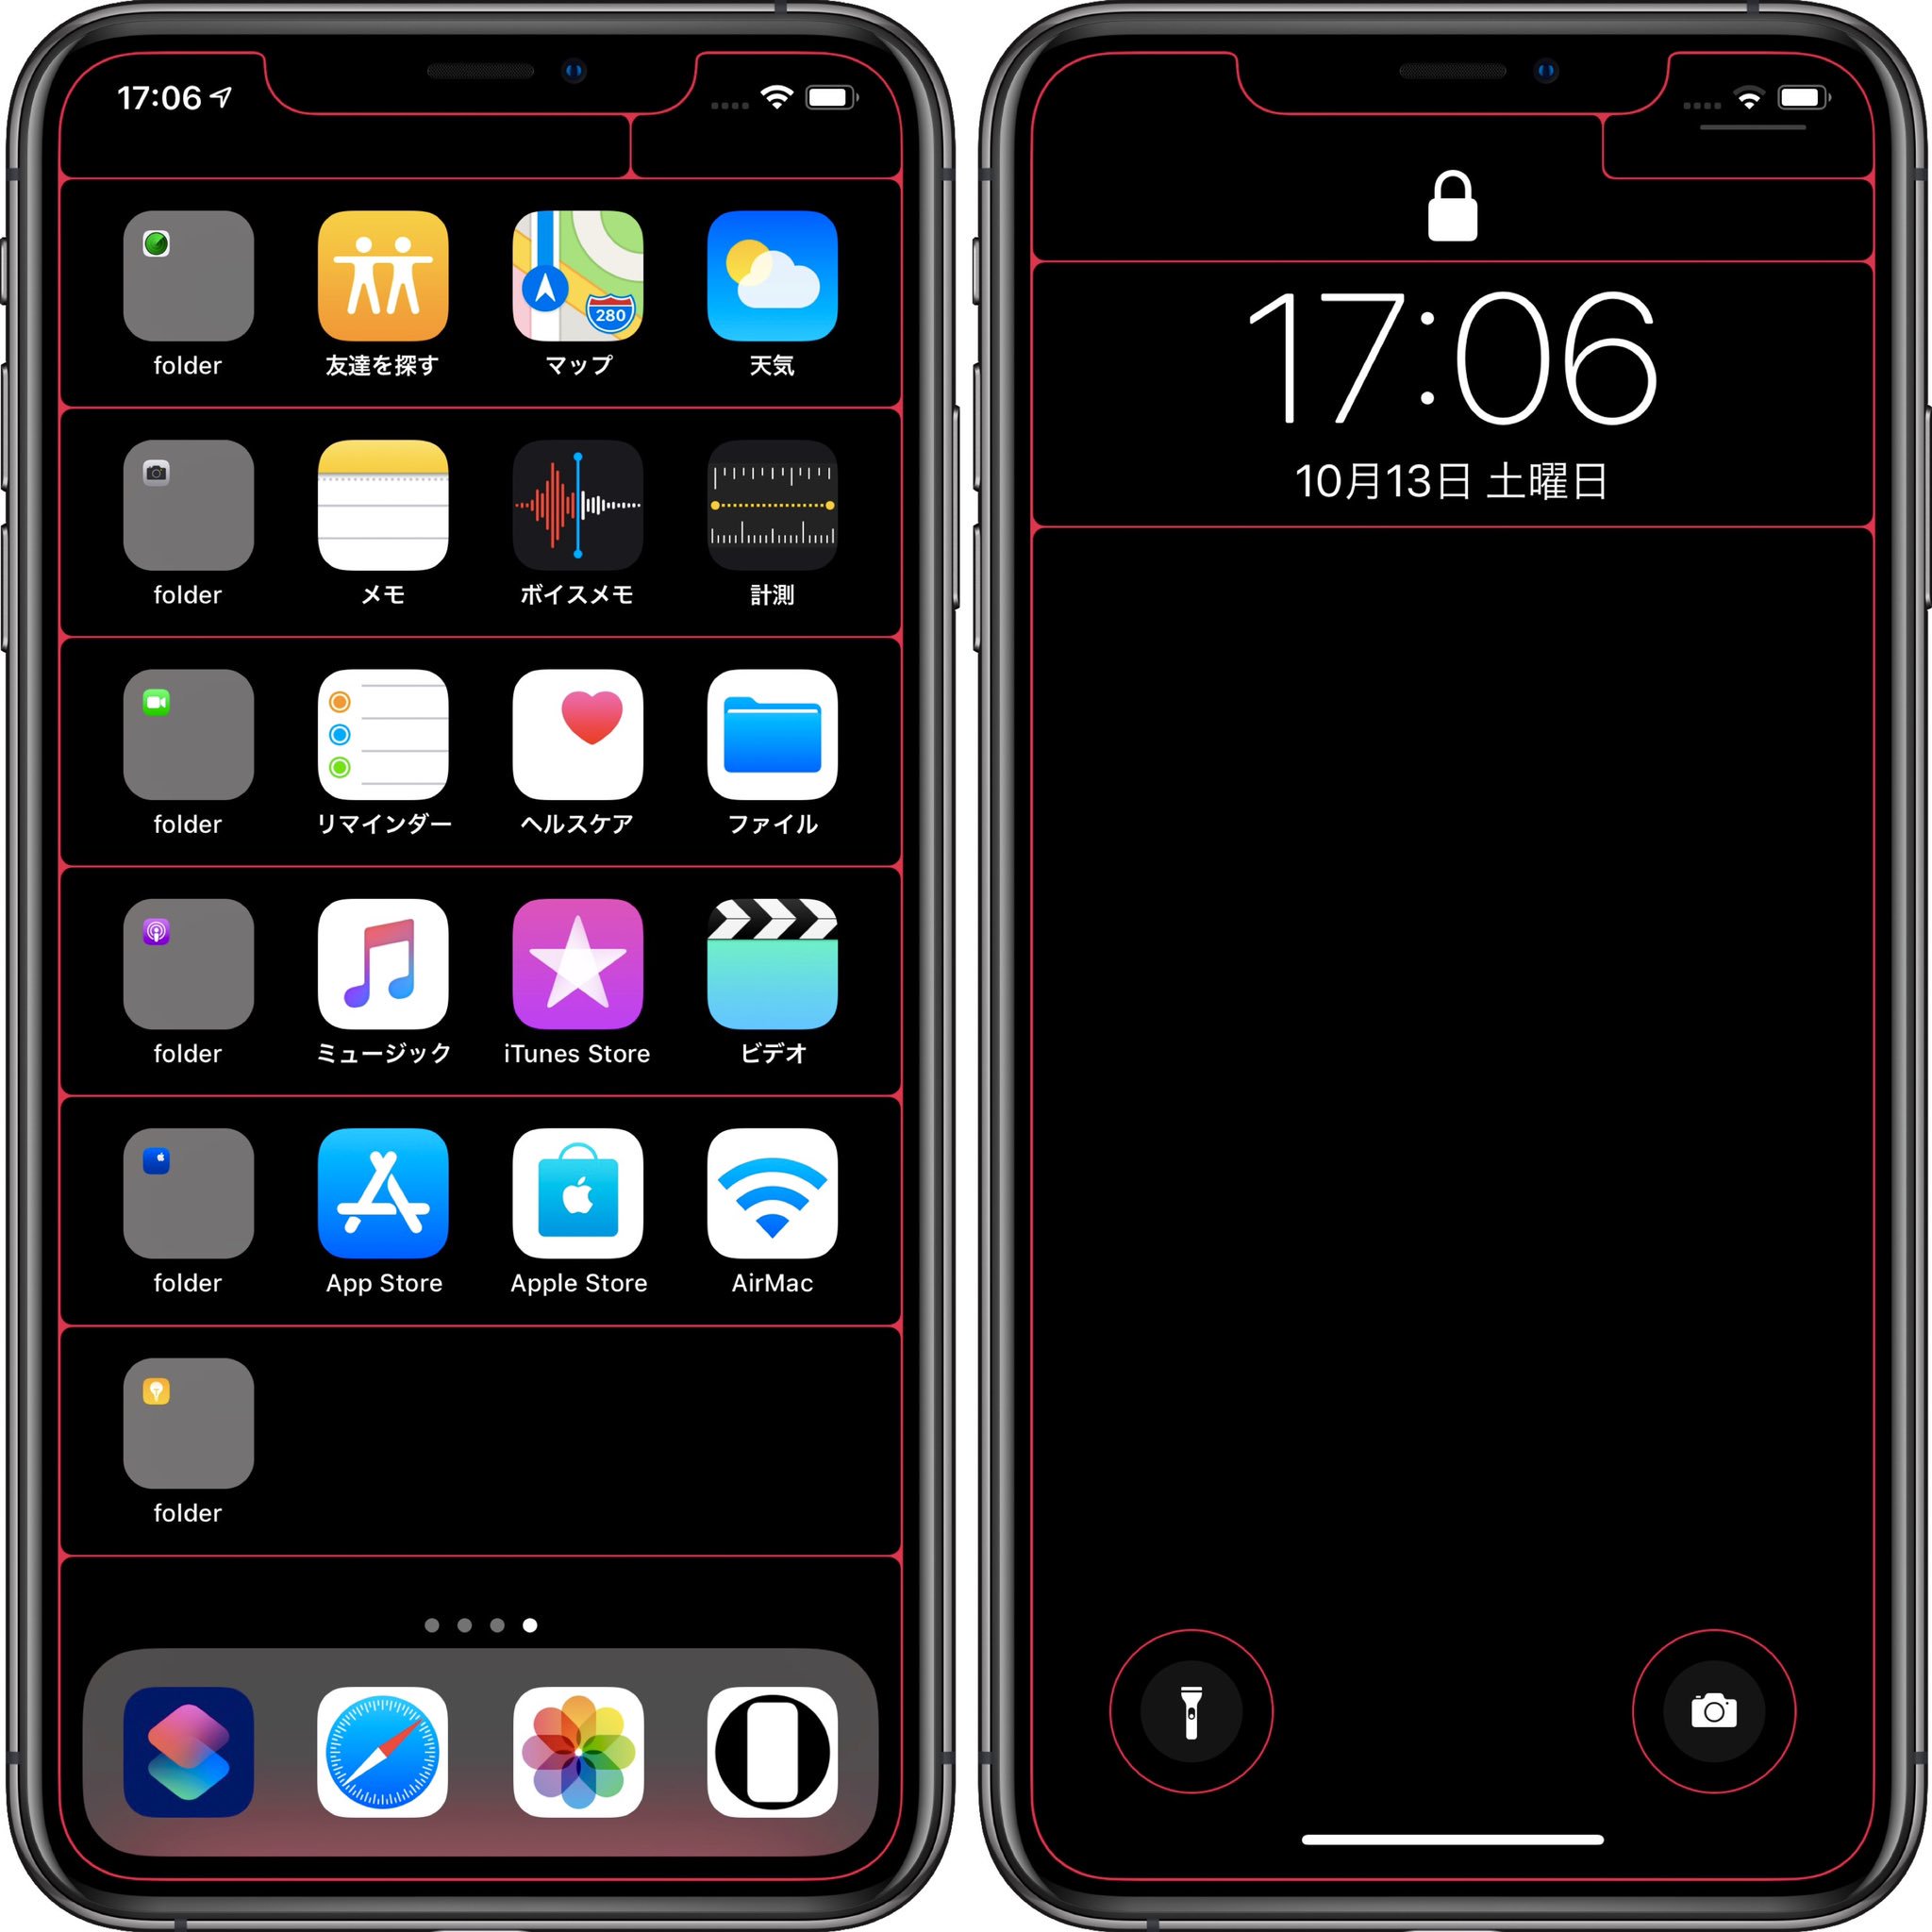 Hide Mysterious Iphone Wallpsper 不思議なiphone壁紙 Iphone Xs Maxにぴったりフィットの棚壁紙31セット Shelf Wallpapers That Fit Perfectly With Iphone Xs Max 31 Sets T Co Tiysktwbkg T Co Zgaxwgqed8